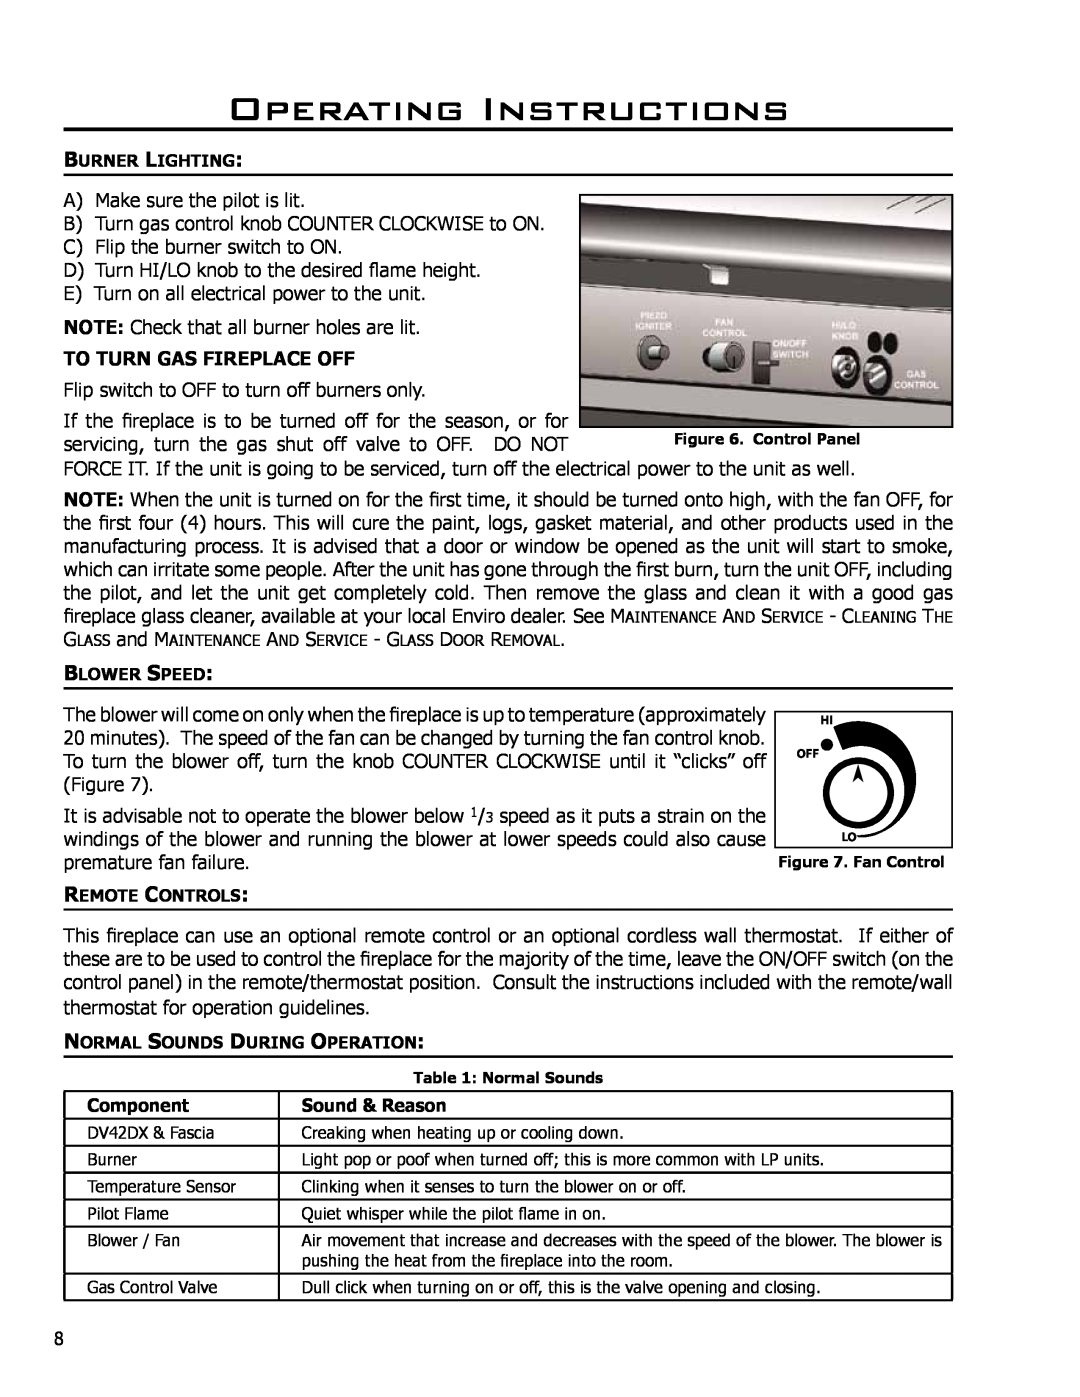 Enviro 50-645, C-11278, C-10078 owner manual To Turn Gas Fireplace Off, Operating Instructions 